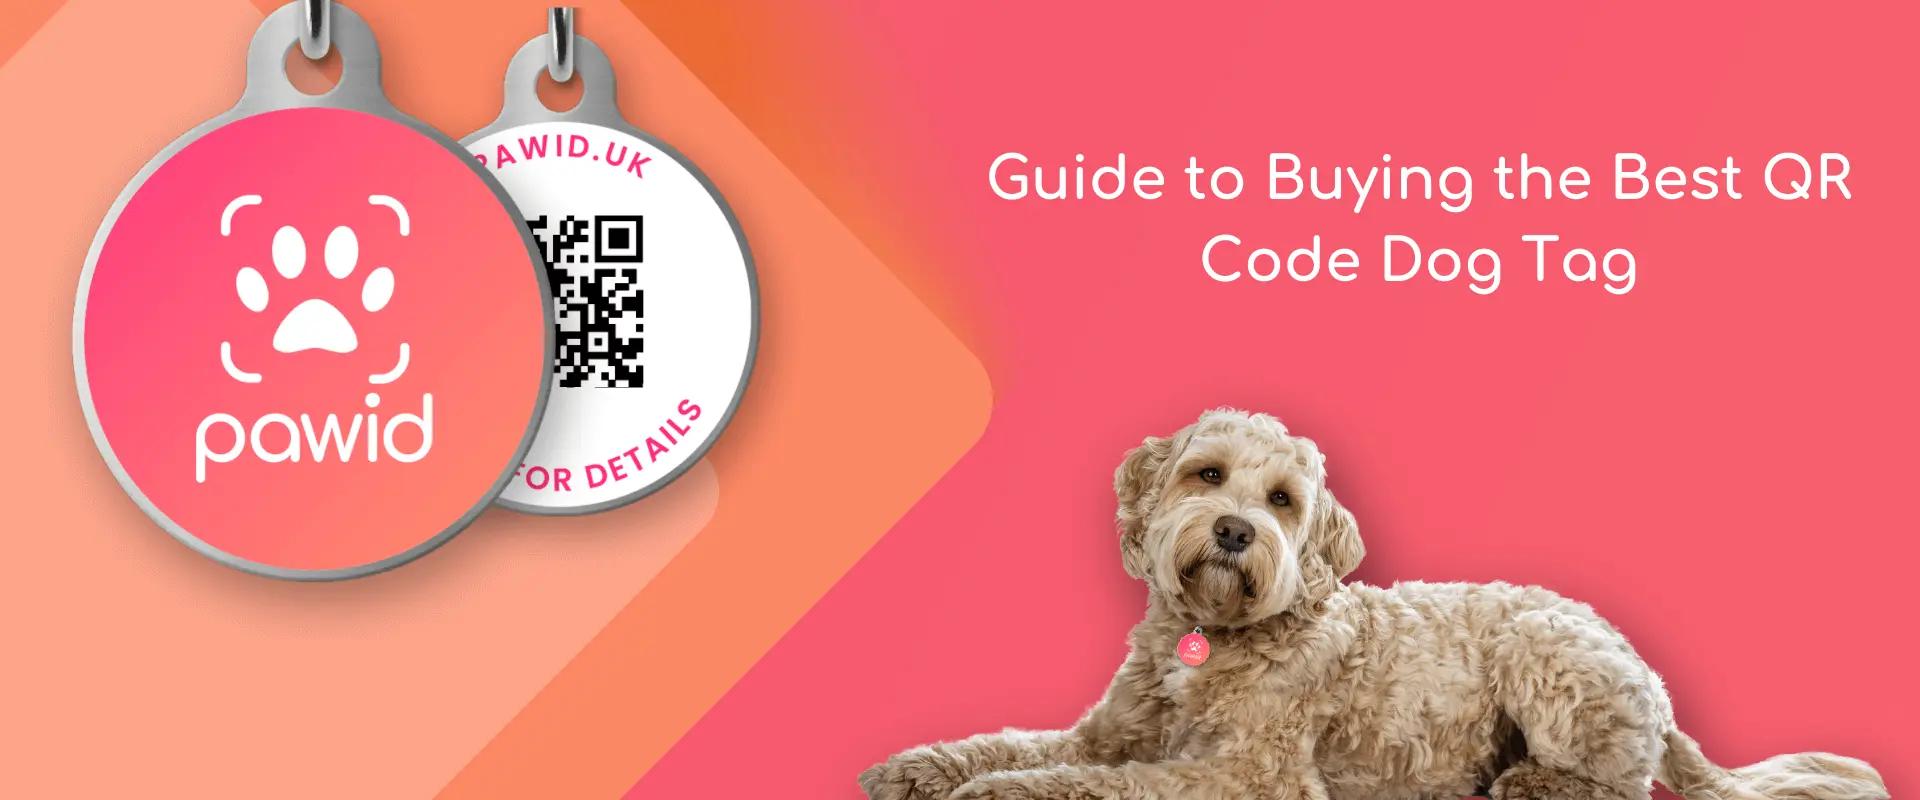 What Are QR Code Dog Tags?